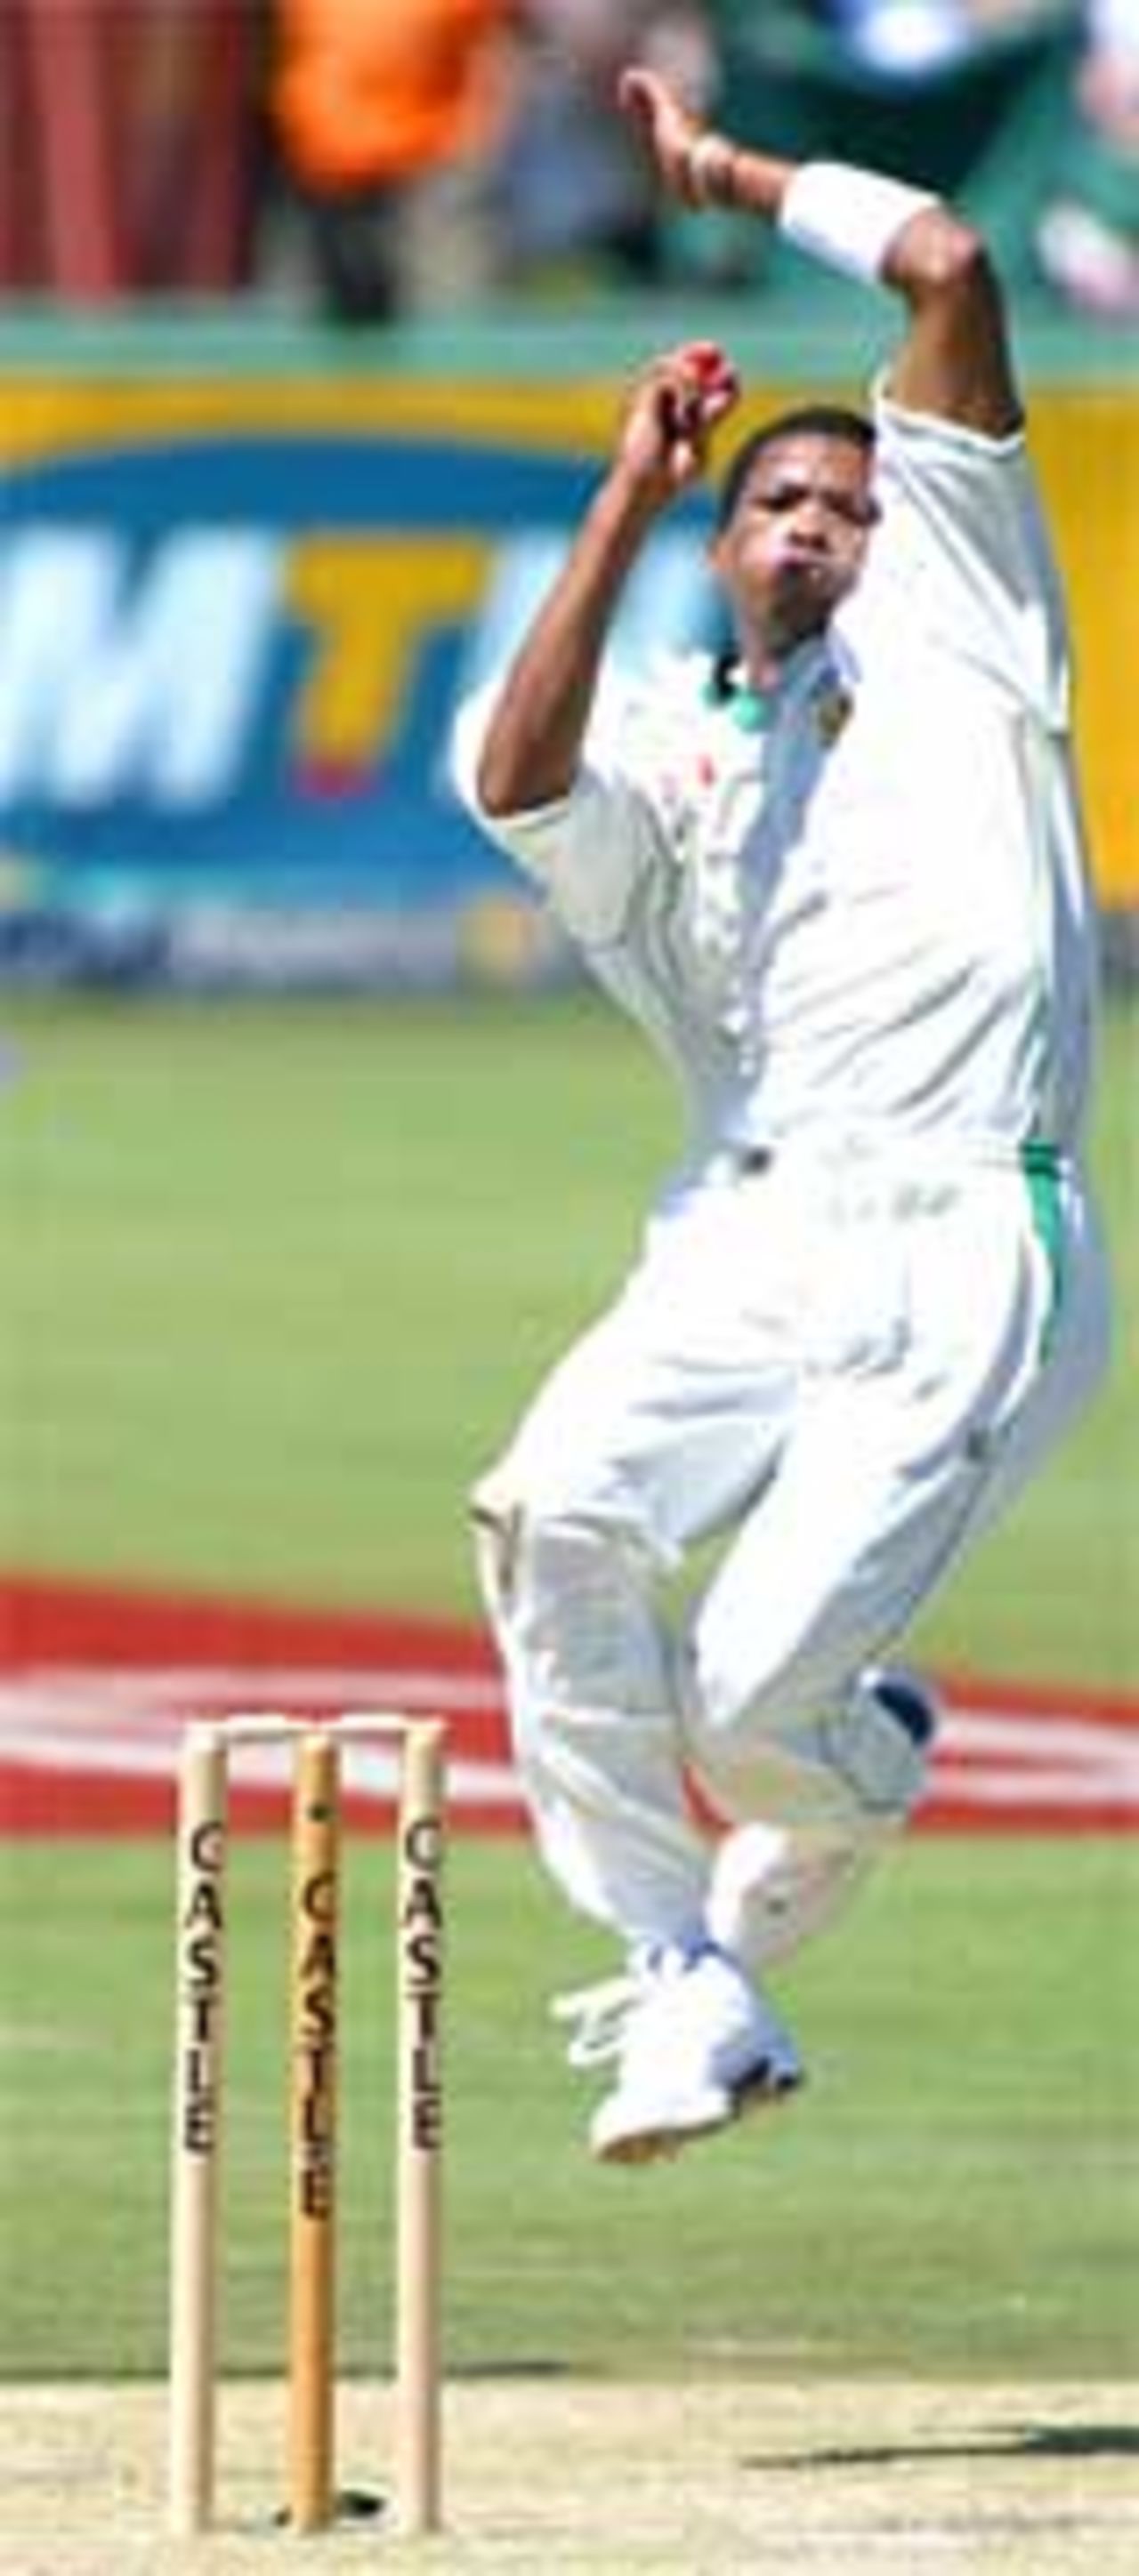 Makhaya Ntini in action, 4th ODI, South Africa v England, Cape Town, February 6, 2005